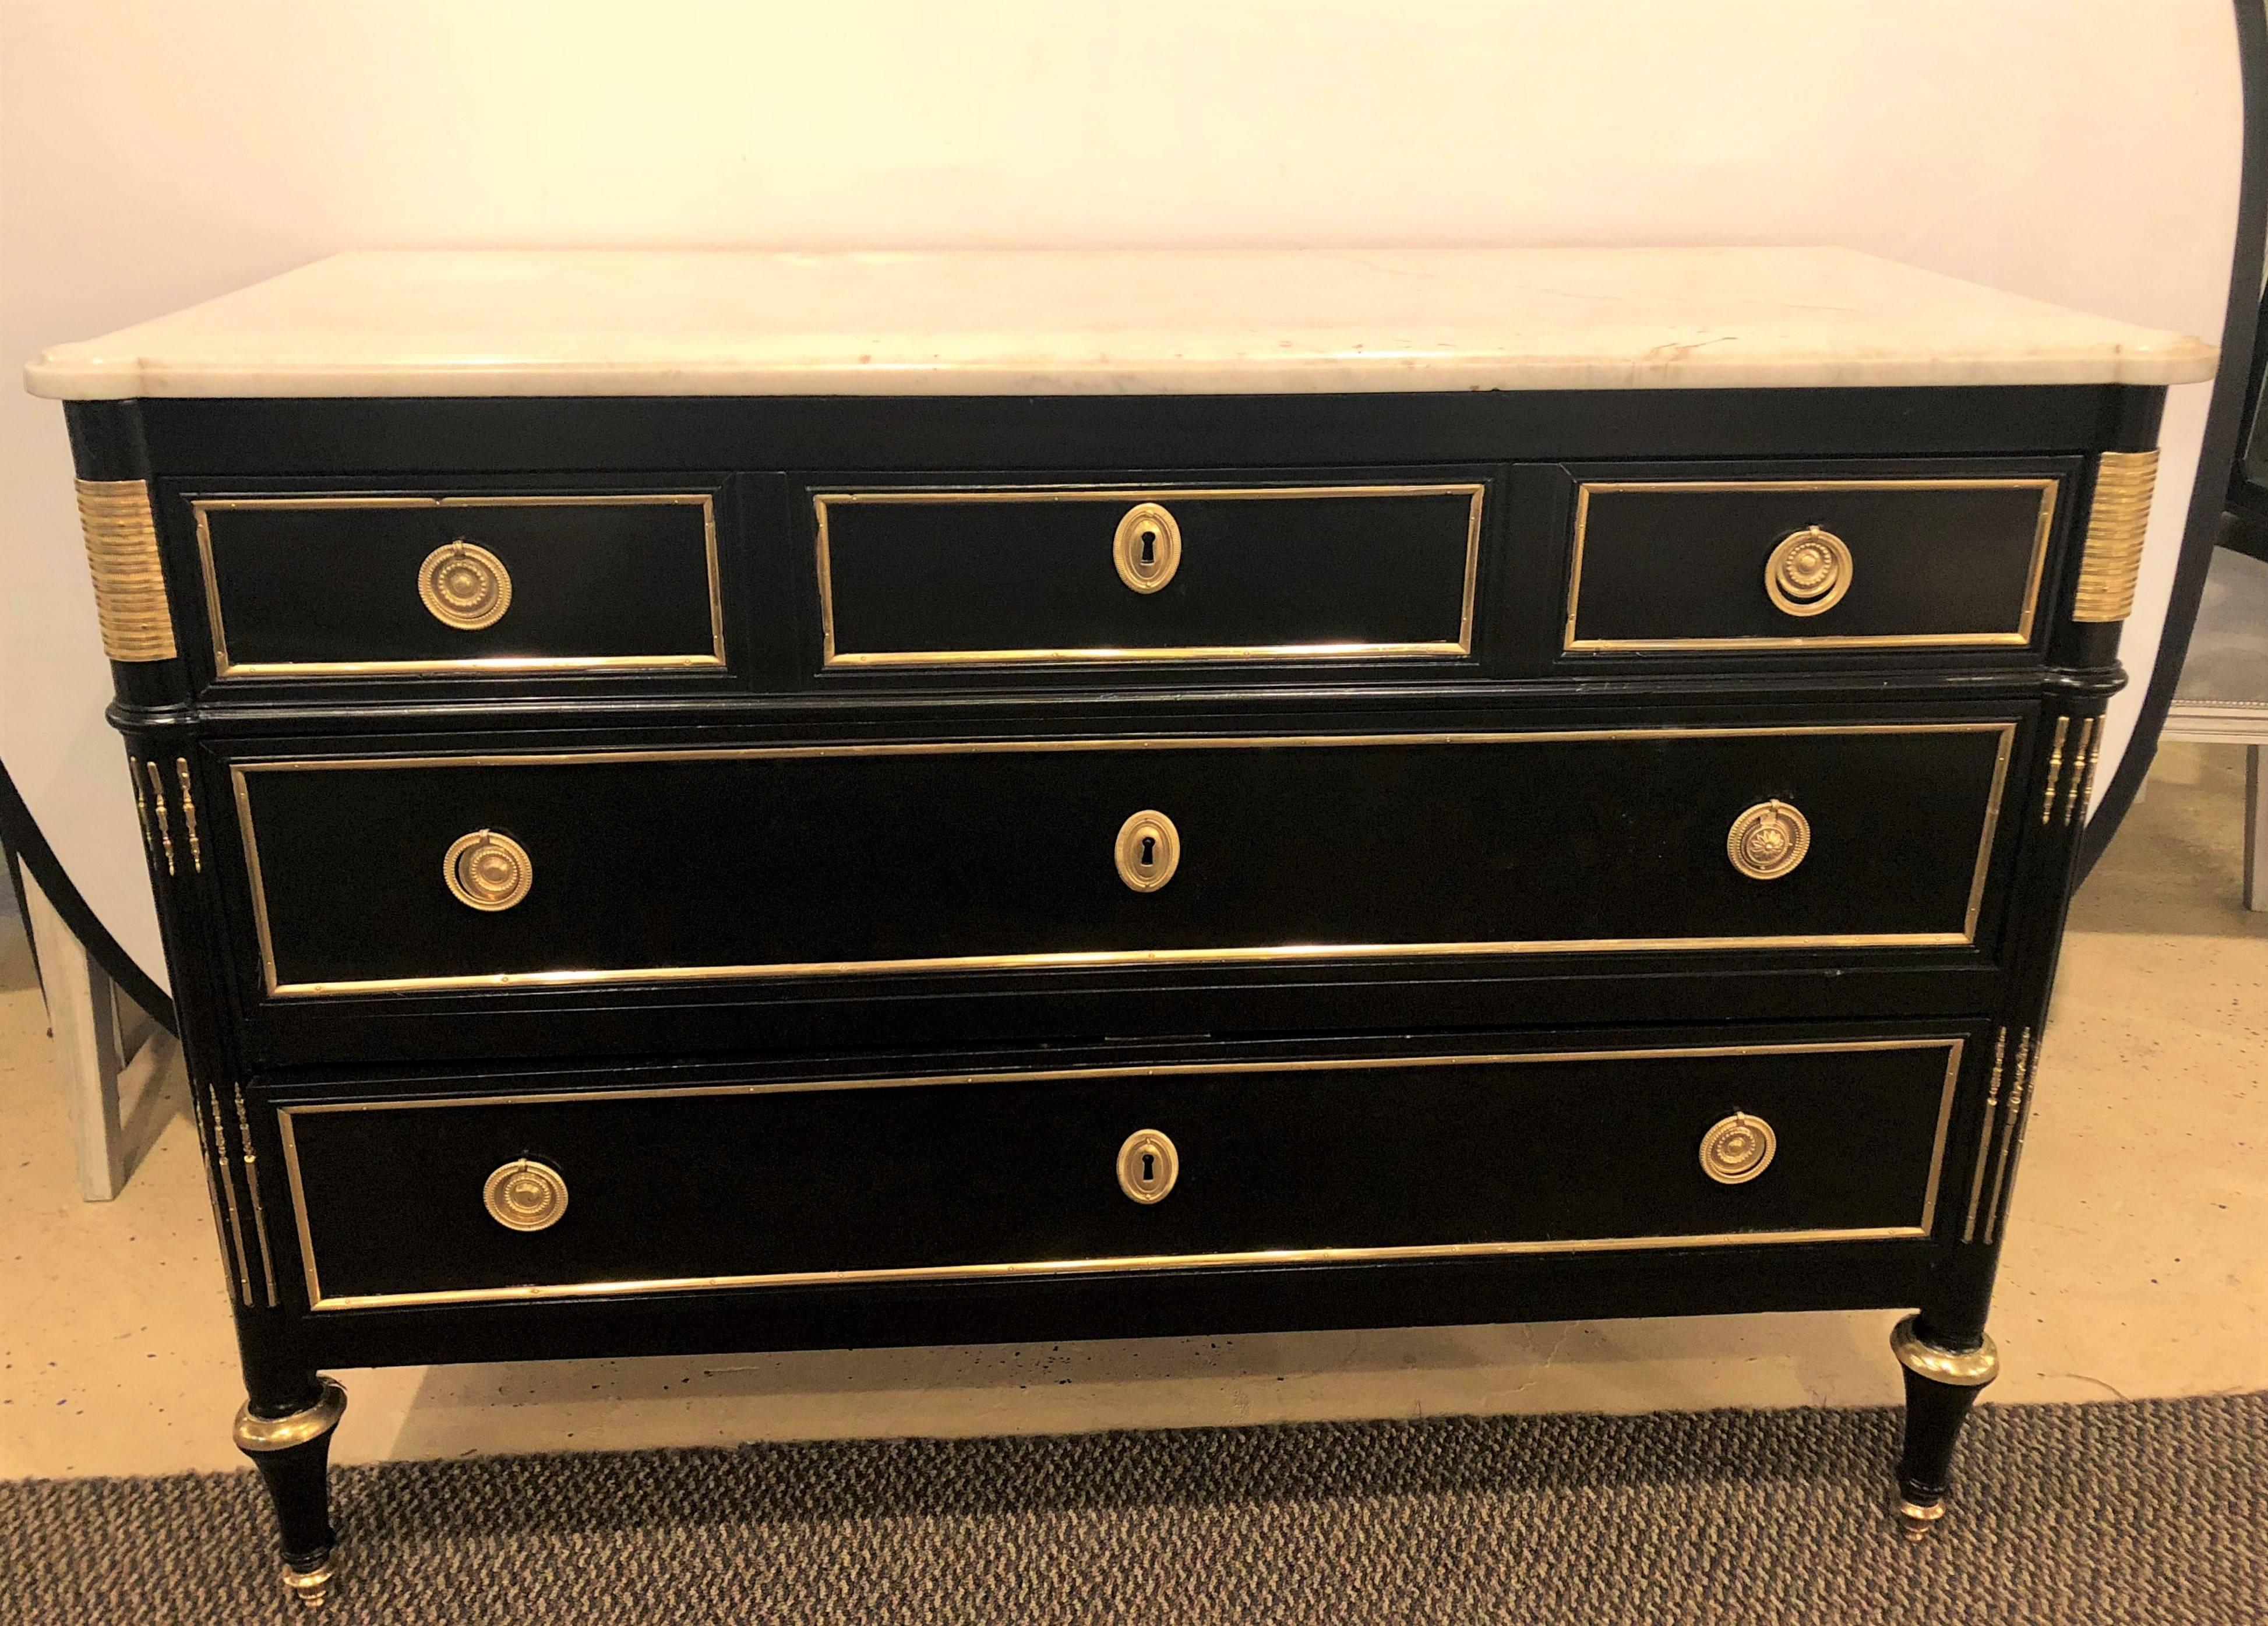 A Louis XVI style Hollywood Regency marble-top commode by Maison Jansen. This commodes depicts this iconic designers flair for style and grace at its peak. The oak lined secondary structure finished in an ebony and bronze-mounted fashion. The case